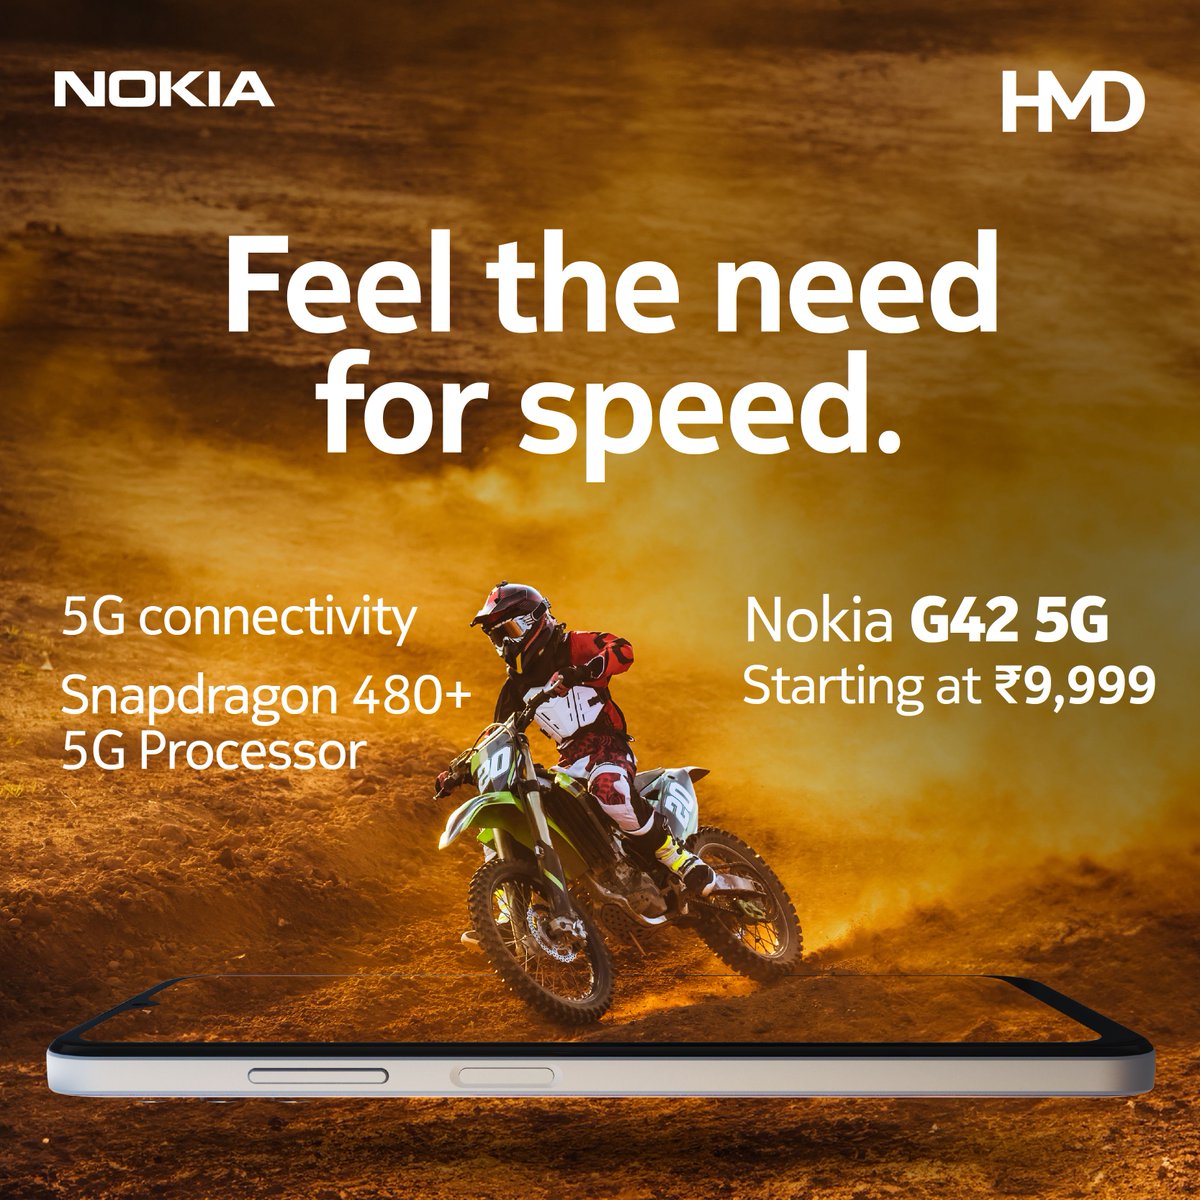 Make high-speed your style with the Nokia G42 5G and its Snapdragon 480+ 5G Processor. Order now from our website hmd.com at a starting price of just ₹9,999. #NokiaG42_5G #MoveFast